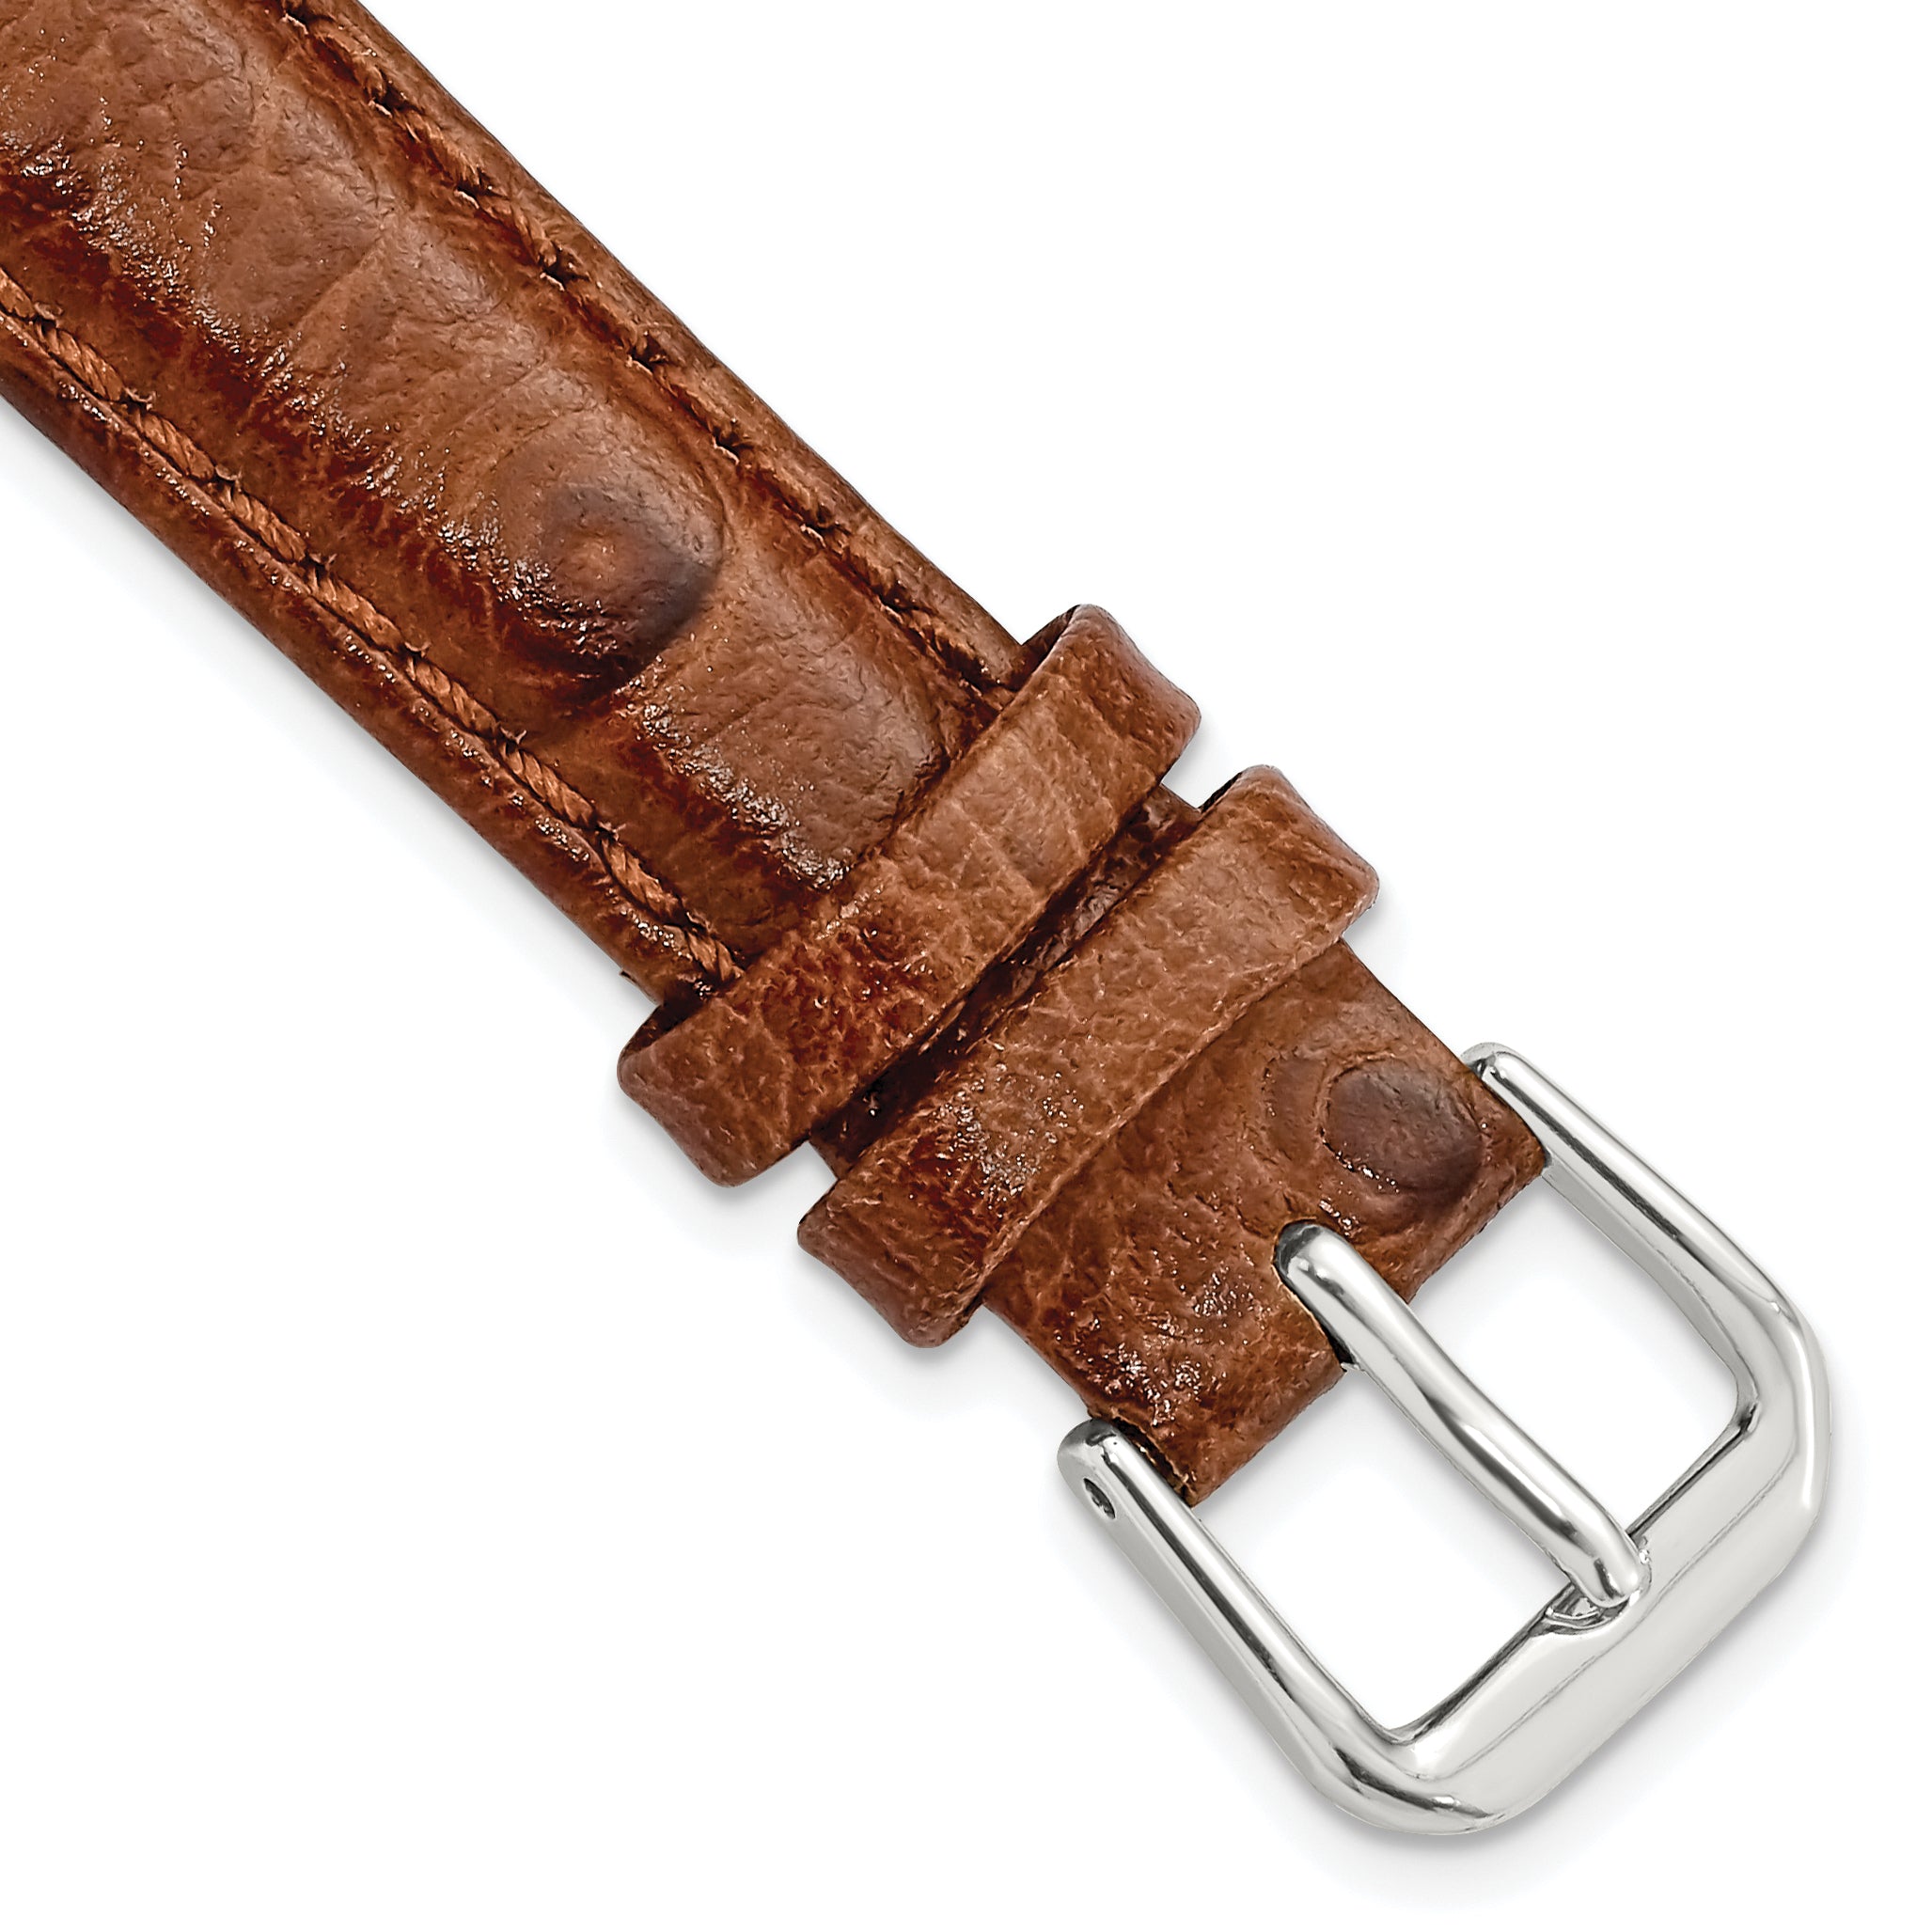 DeBeer 14mm Havana Ostrich Grain Leather with Silver-tone Buckle 6.75 inch Watch Band